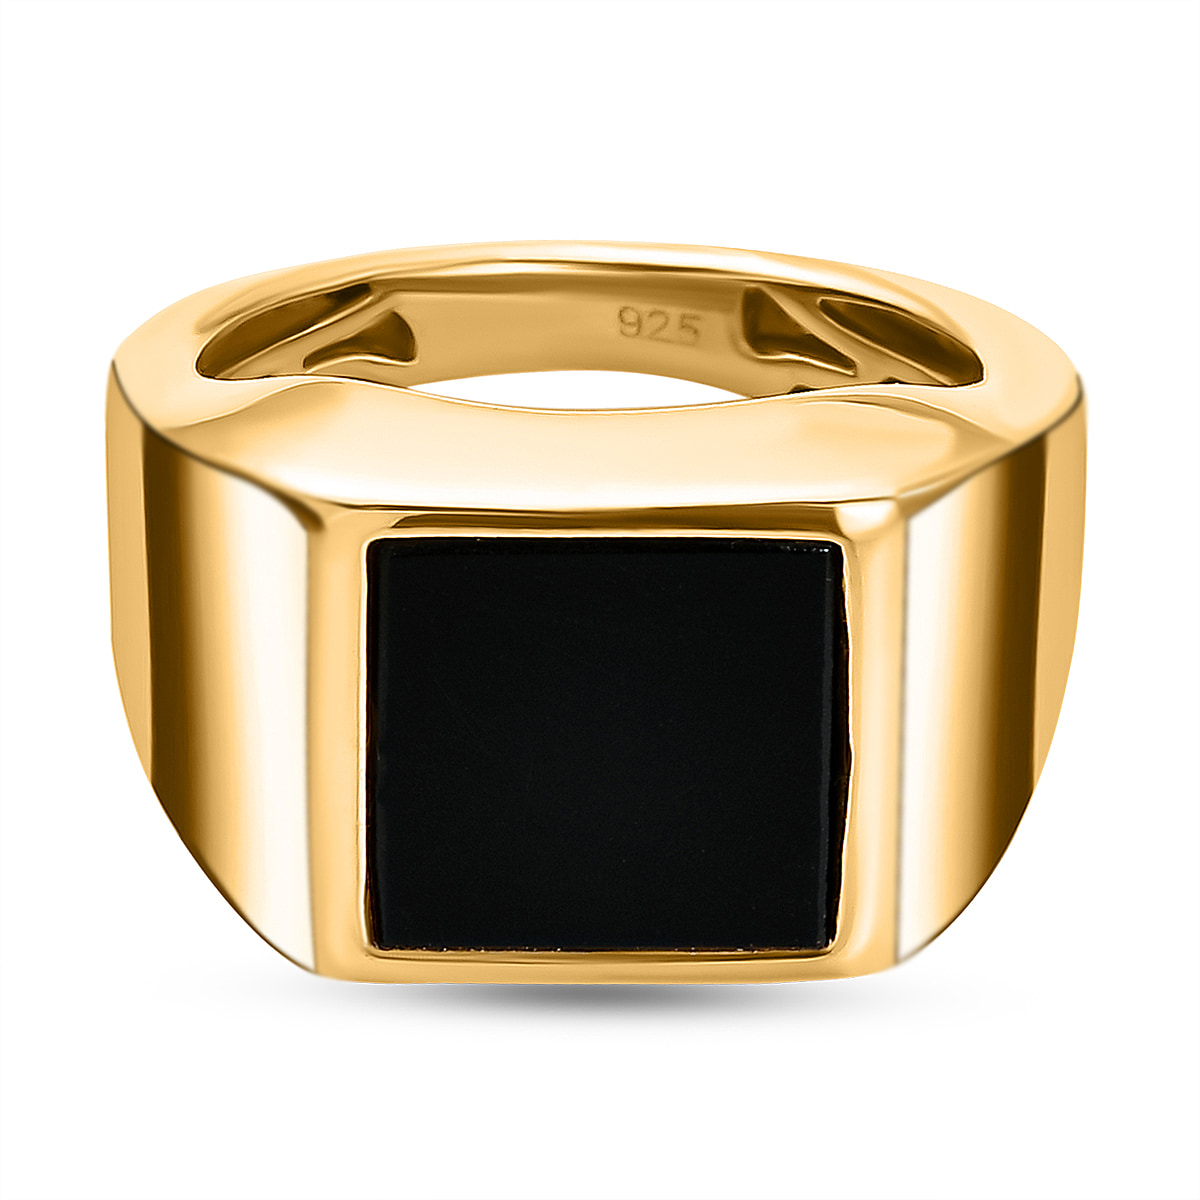 Black Onyx Solitaire Ring in 14K Vermeil Gold Overlay Sterling Silver 3.61  Ct, Silver Wt. 8.52 Gms - 8834629 - TJC